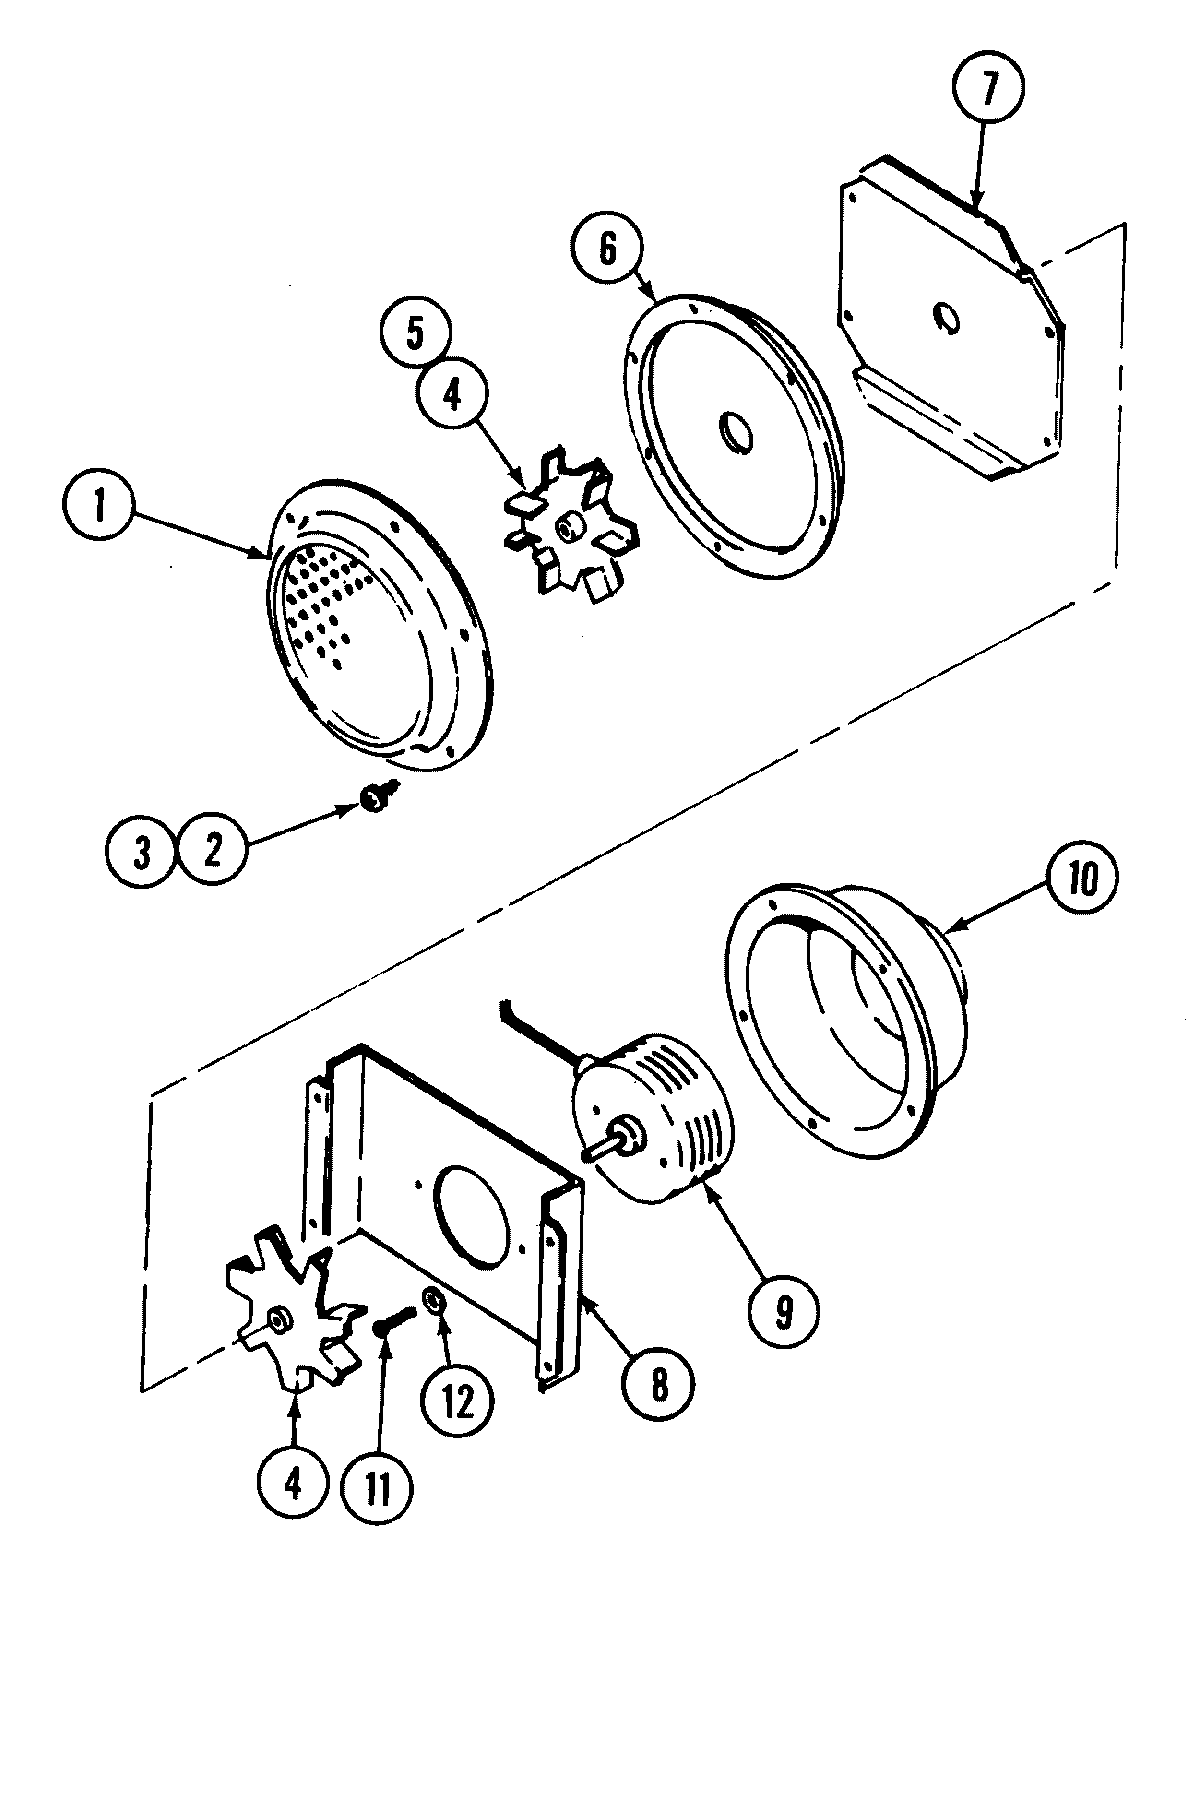 01 - BLOWER MOTOR-CONVECTION